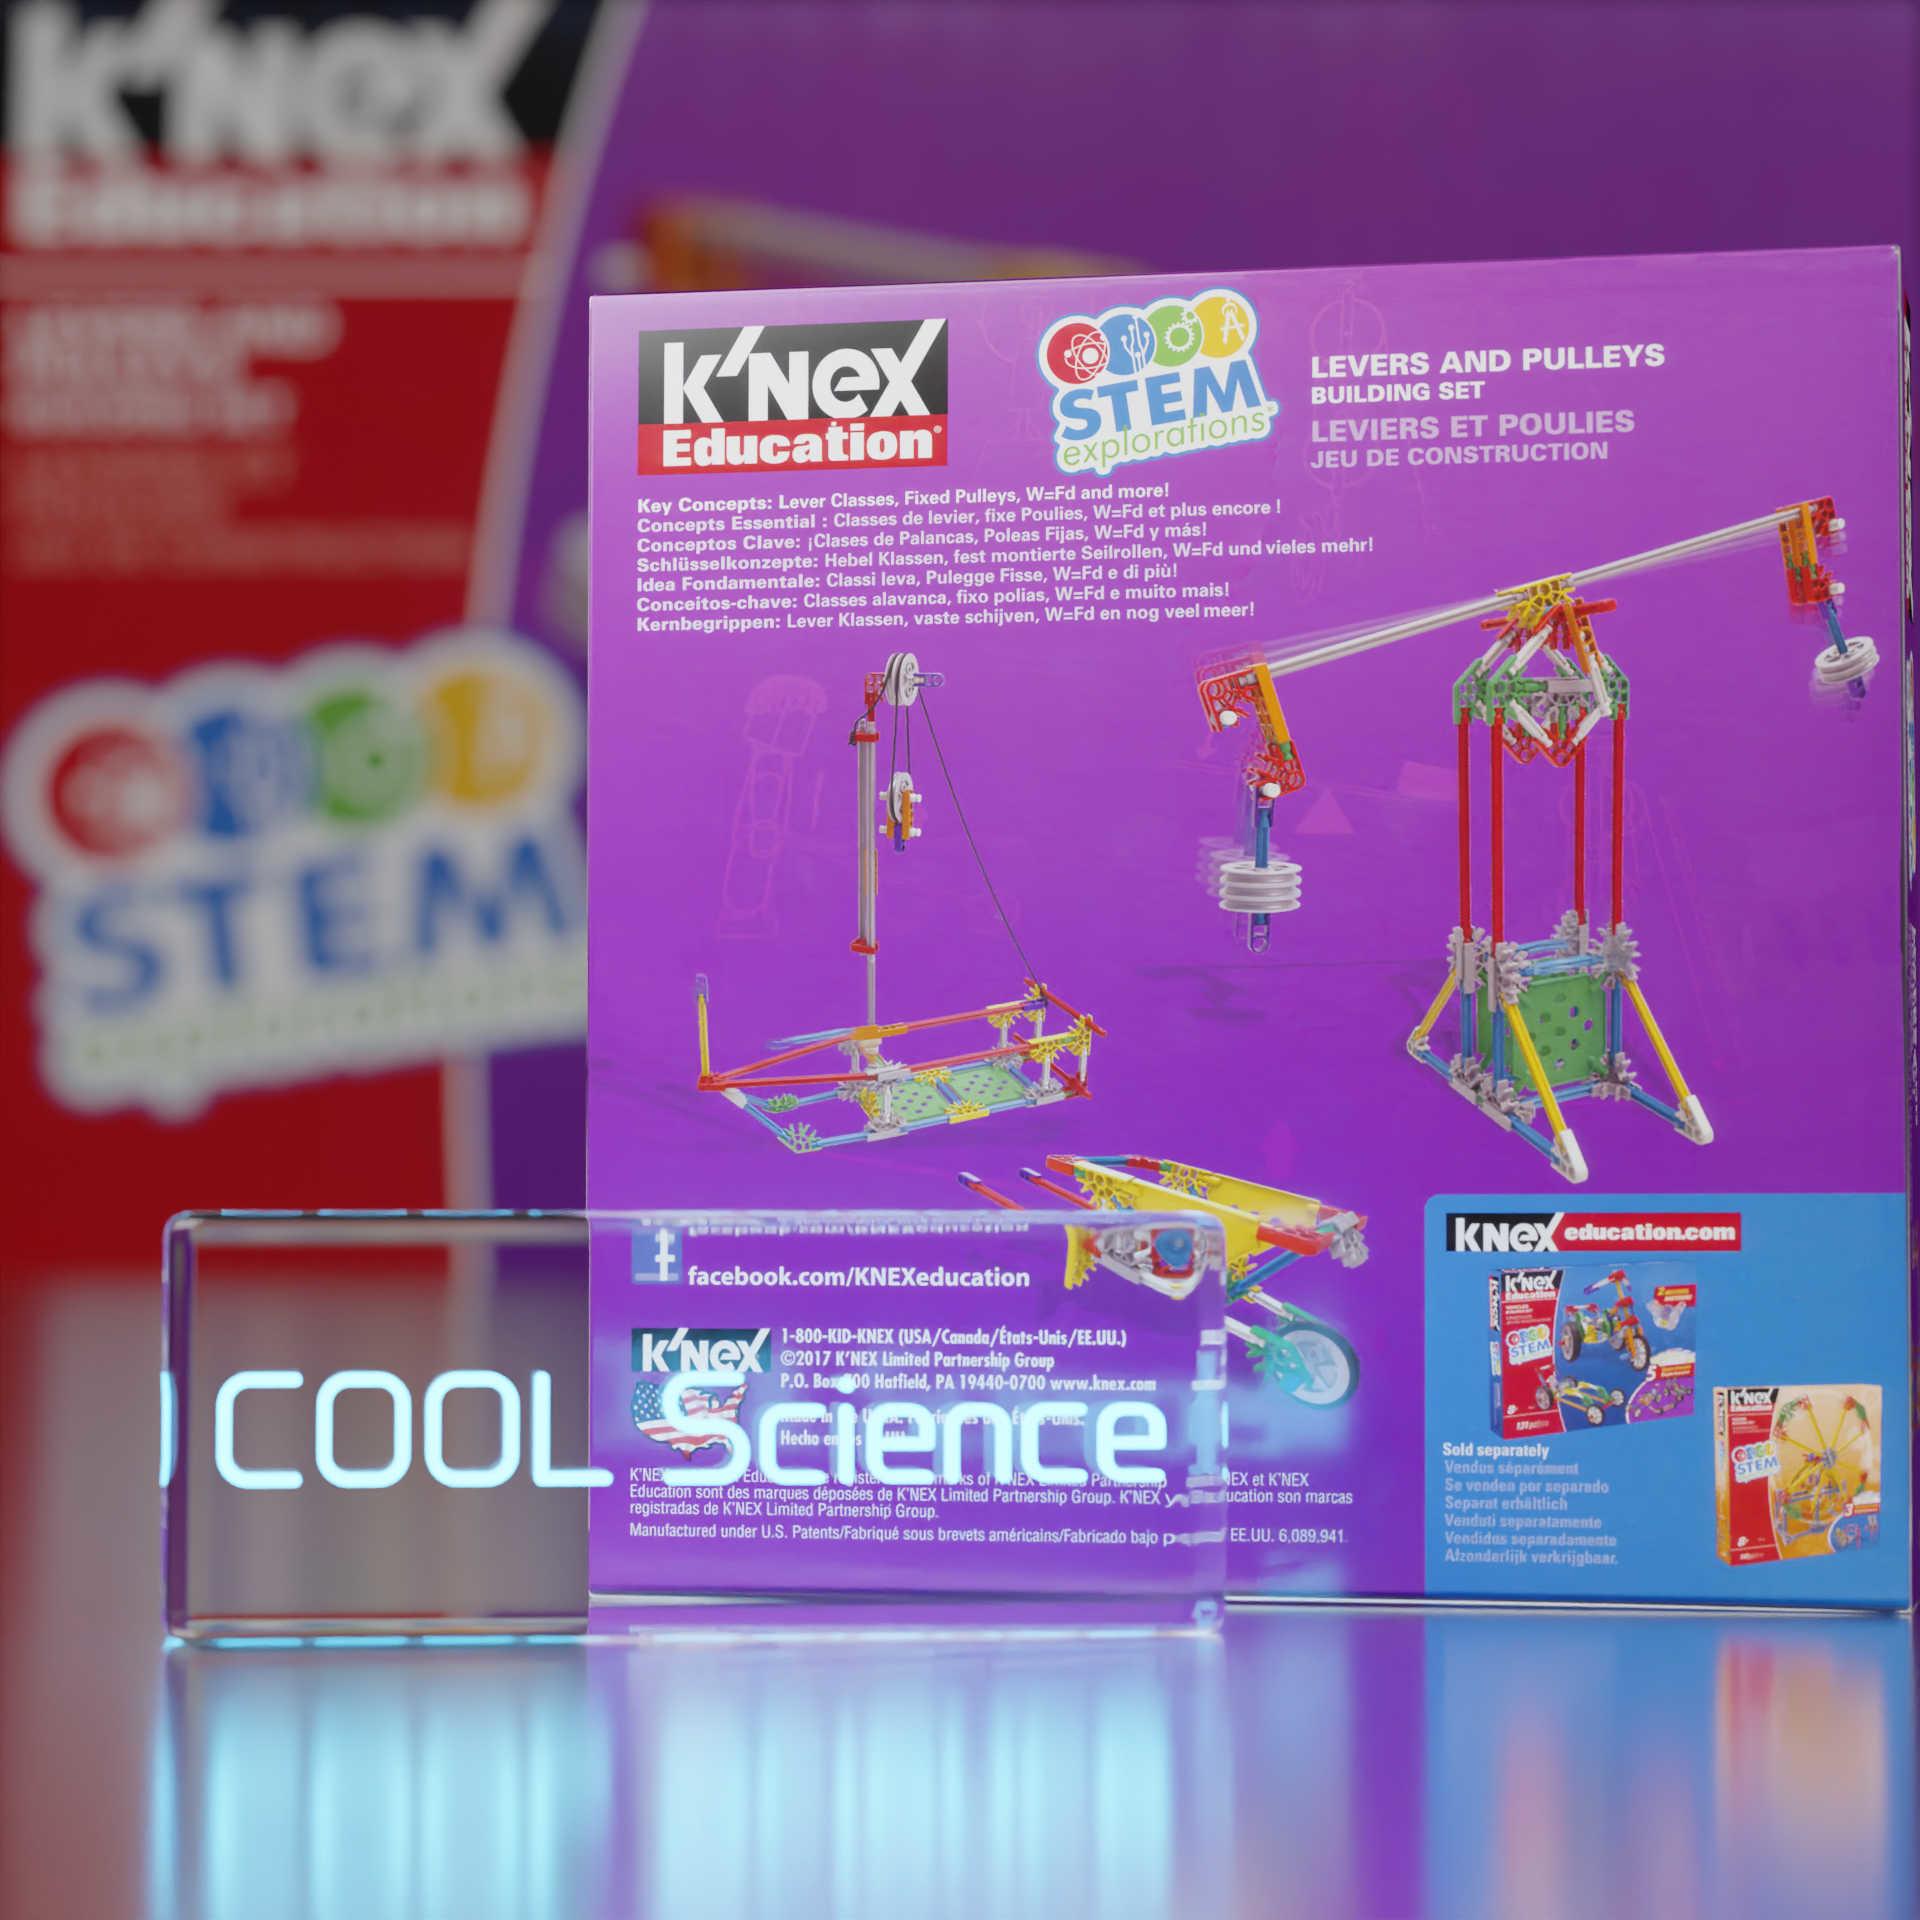 Back View of the K'NEX Education Levers and Pulleys Building Set box